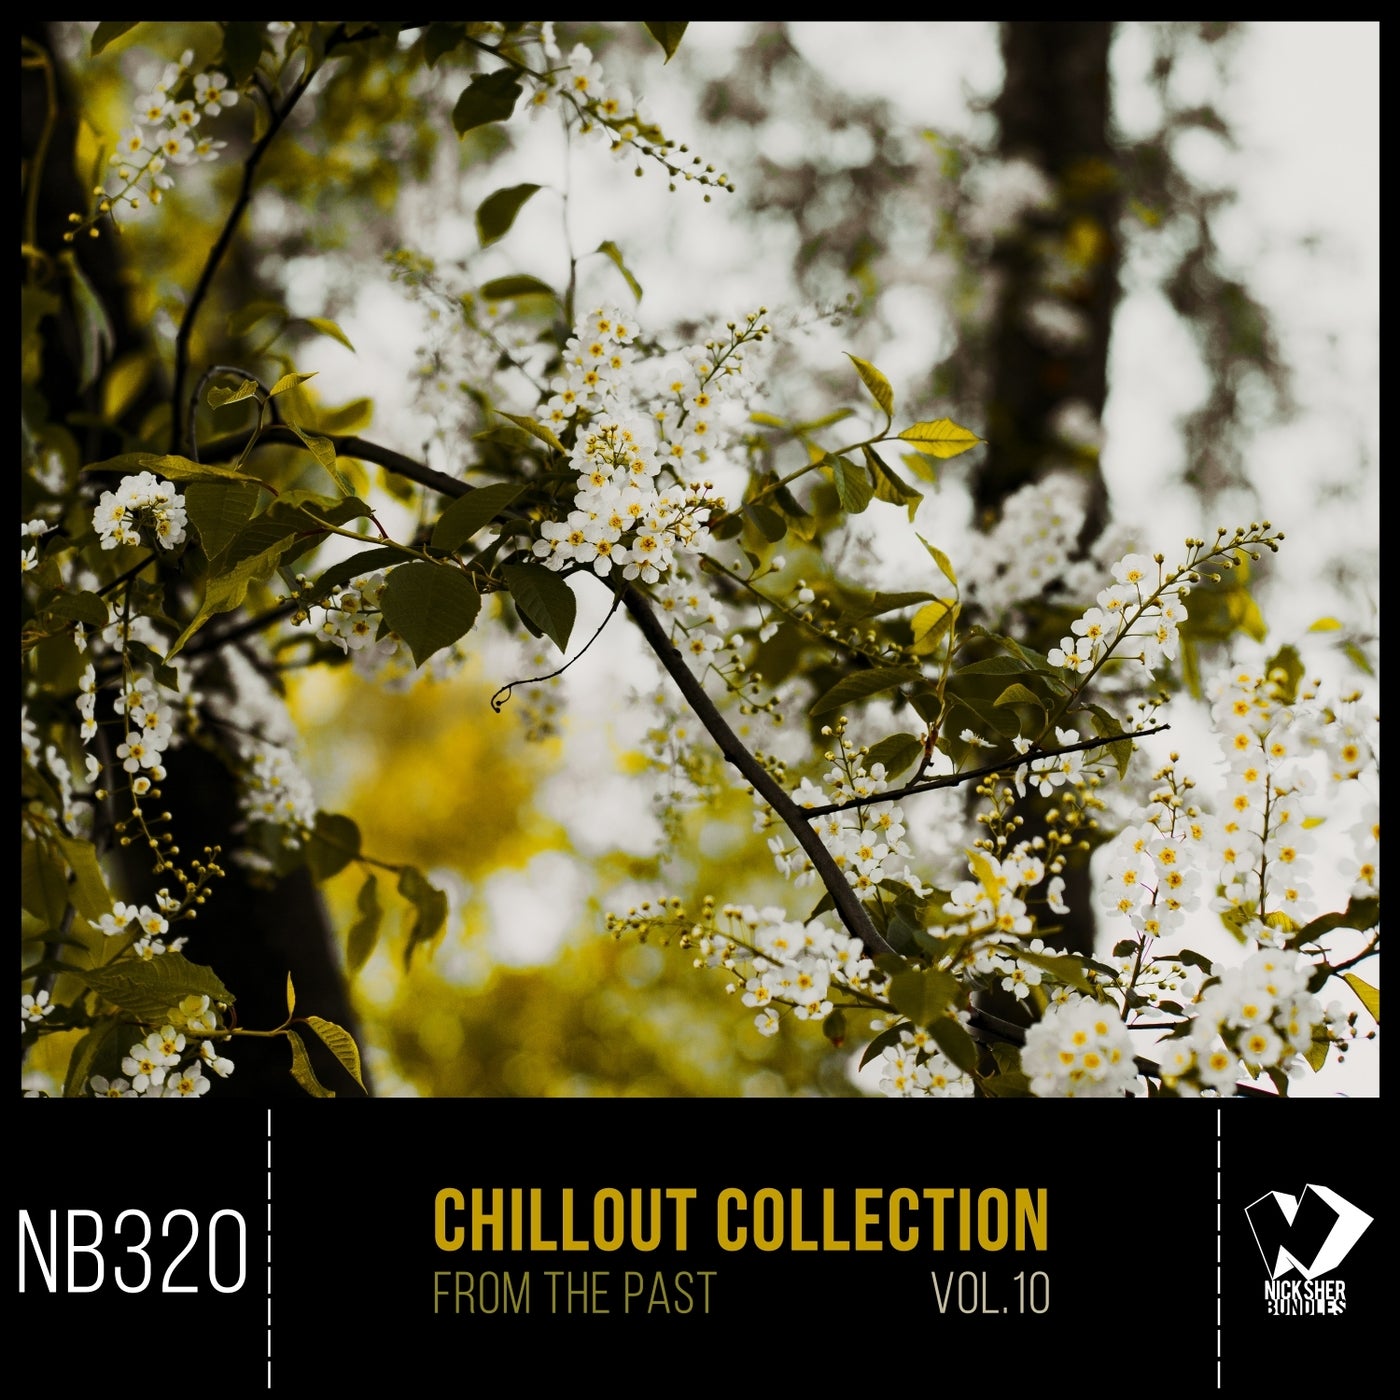 Angelo–K, Daminika – Chillout Collection from the Past, Vol. 10 [NB320]